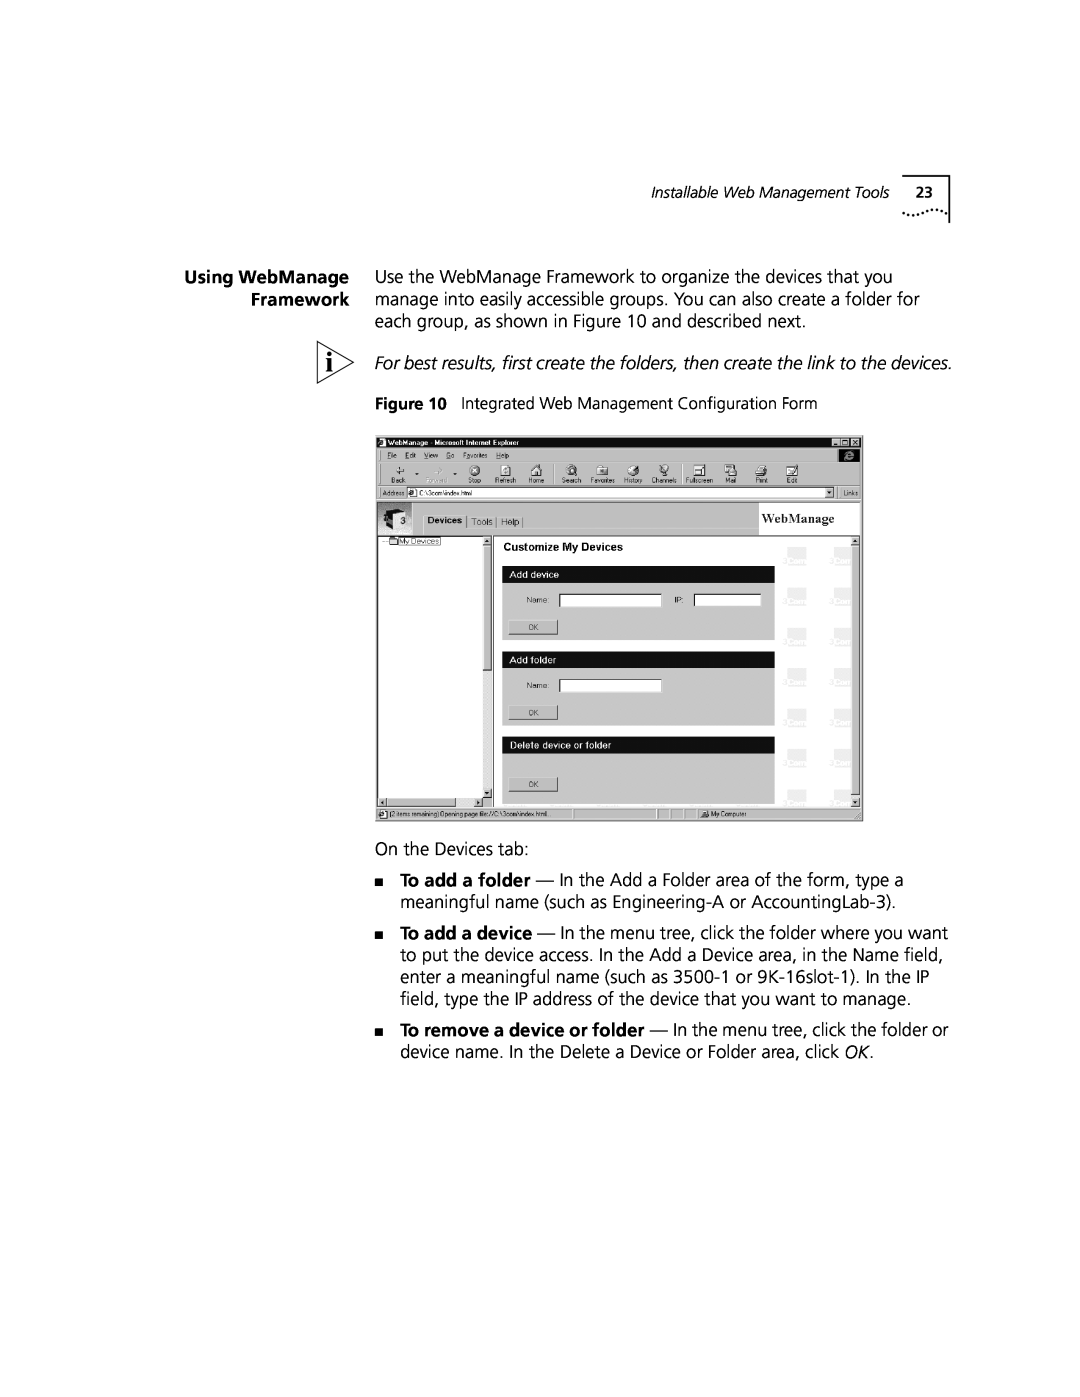 3Com 3900 each group, as shown in and described next, On the Devices tab, Integrated Web Management Configuration Form 